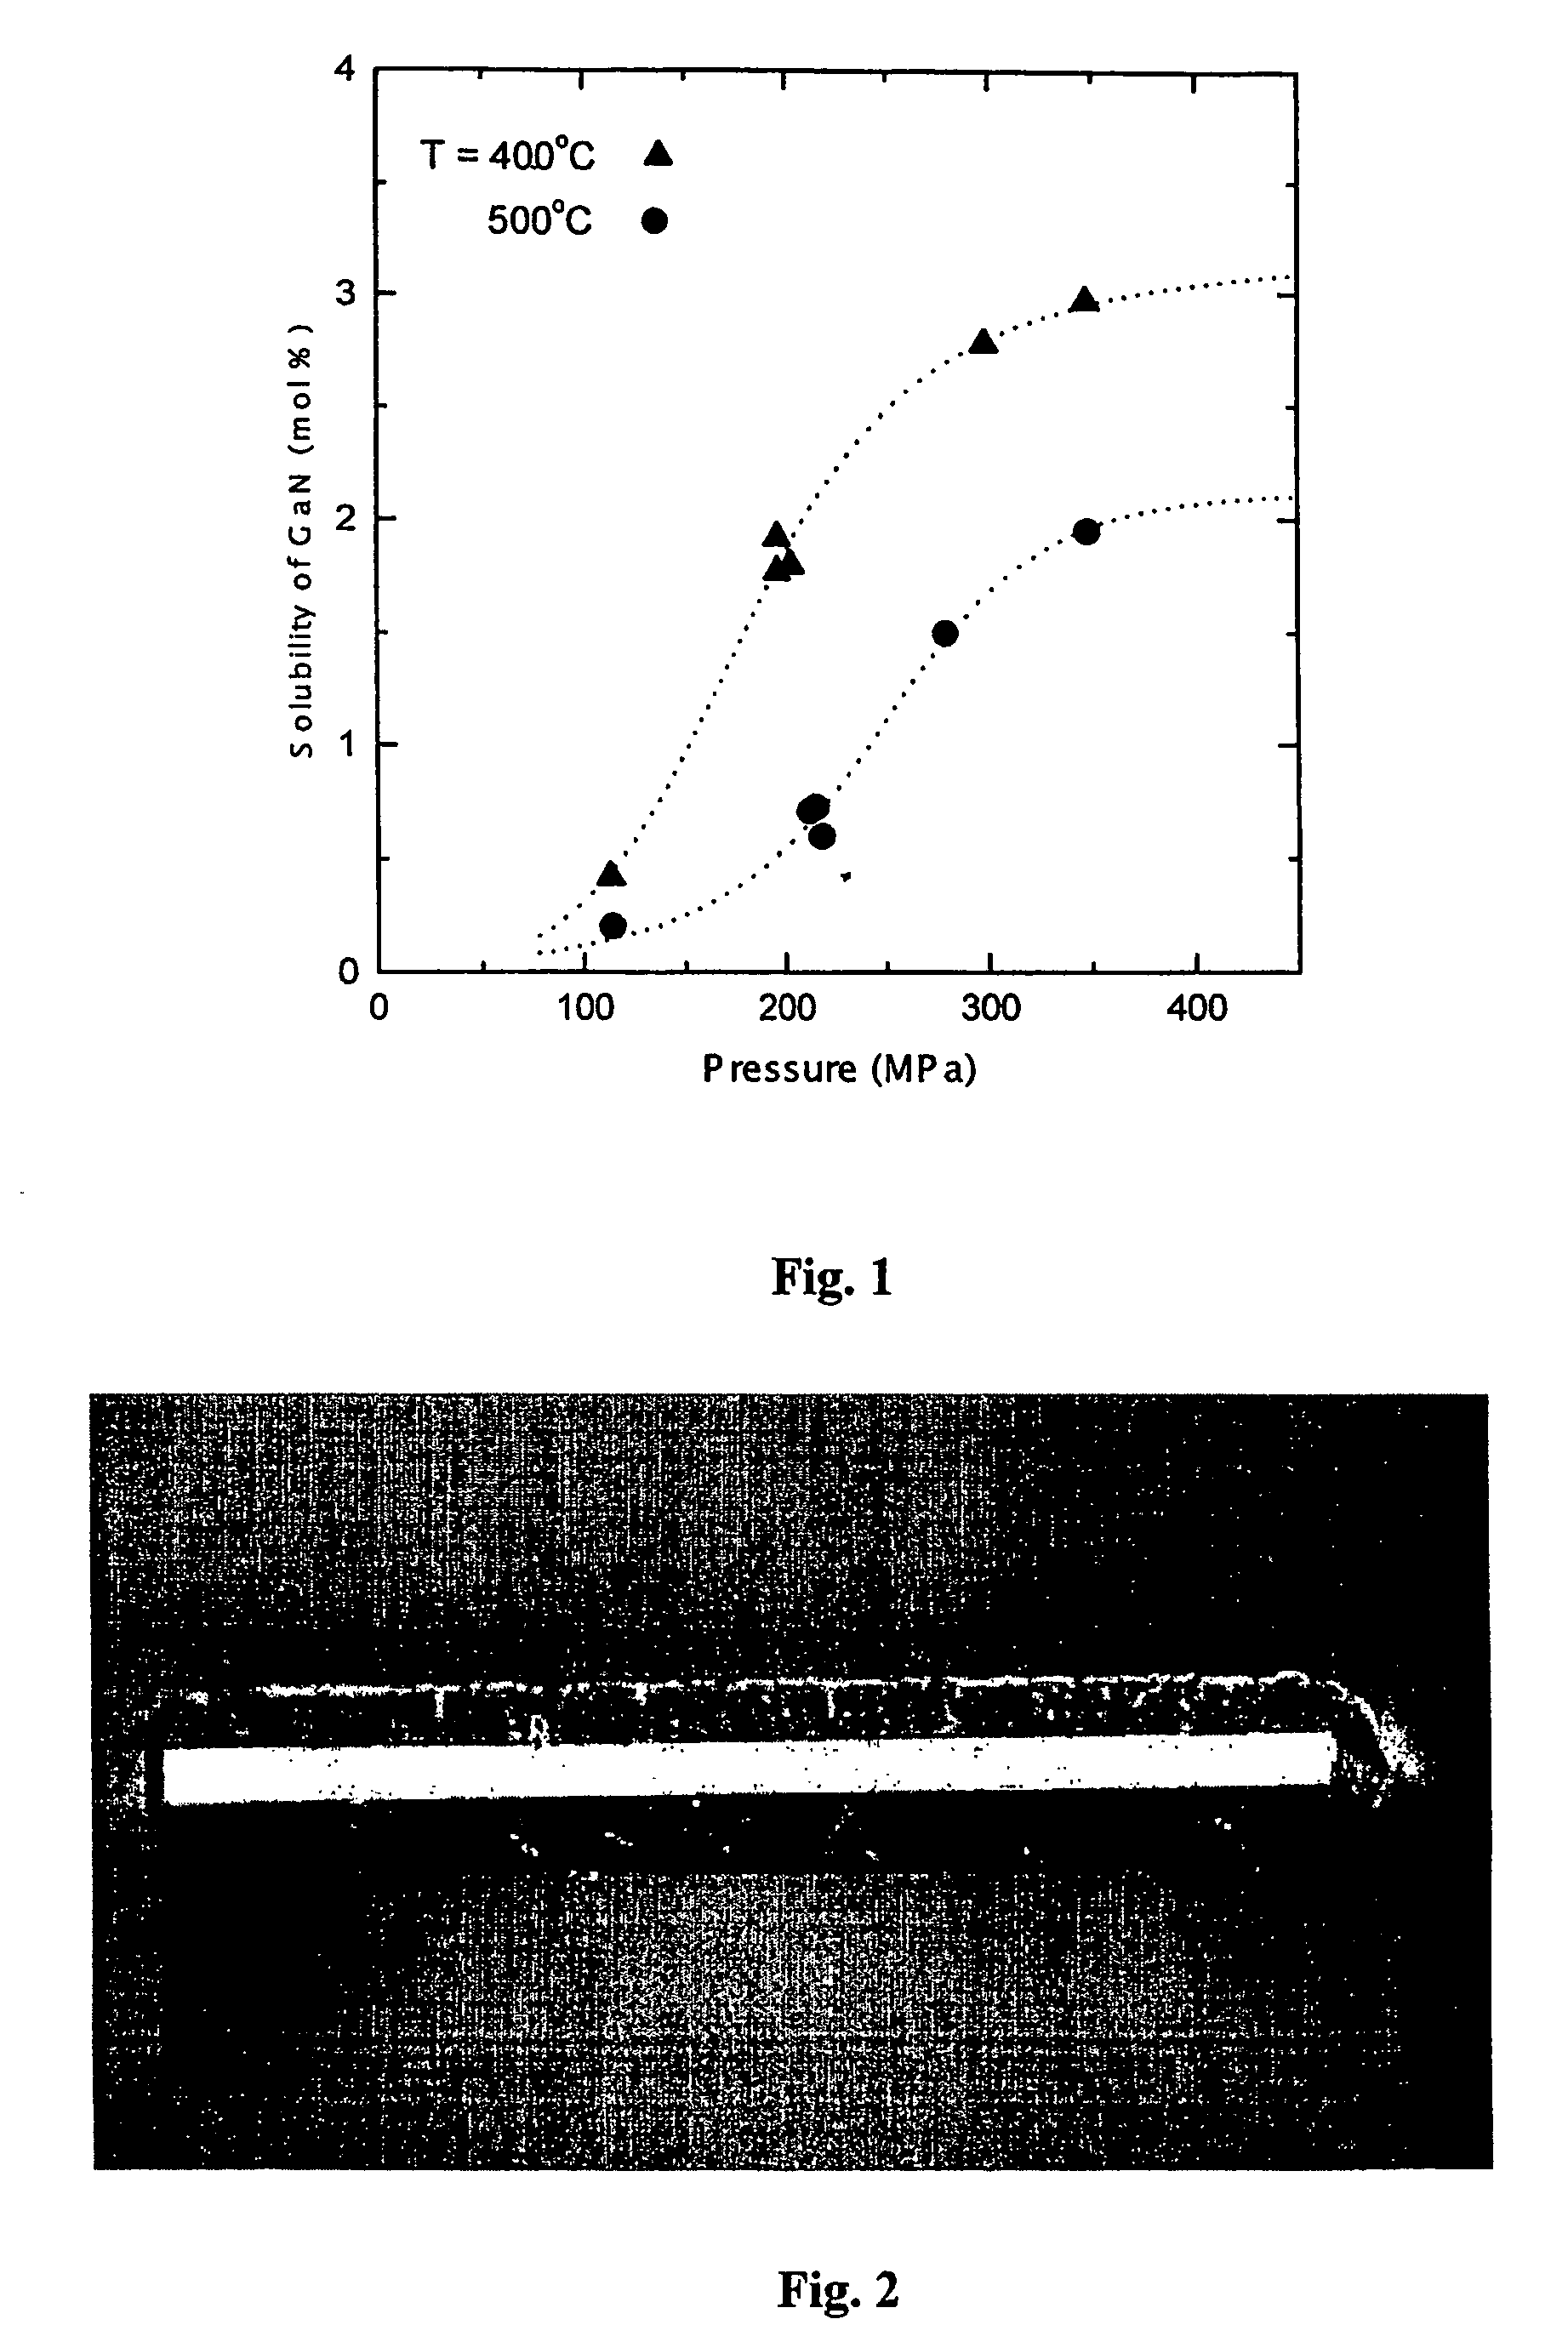 Bulk nitride mono-crystal including substrate for epitaxy